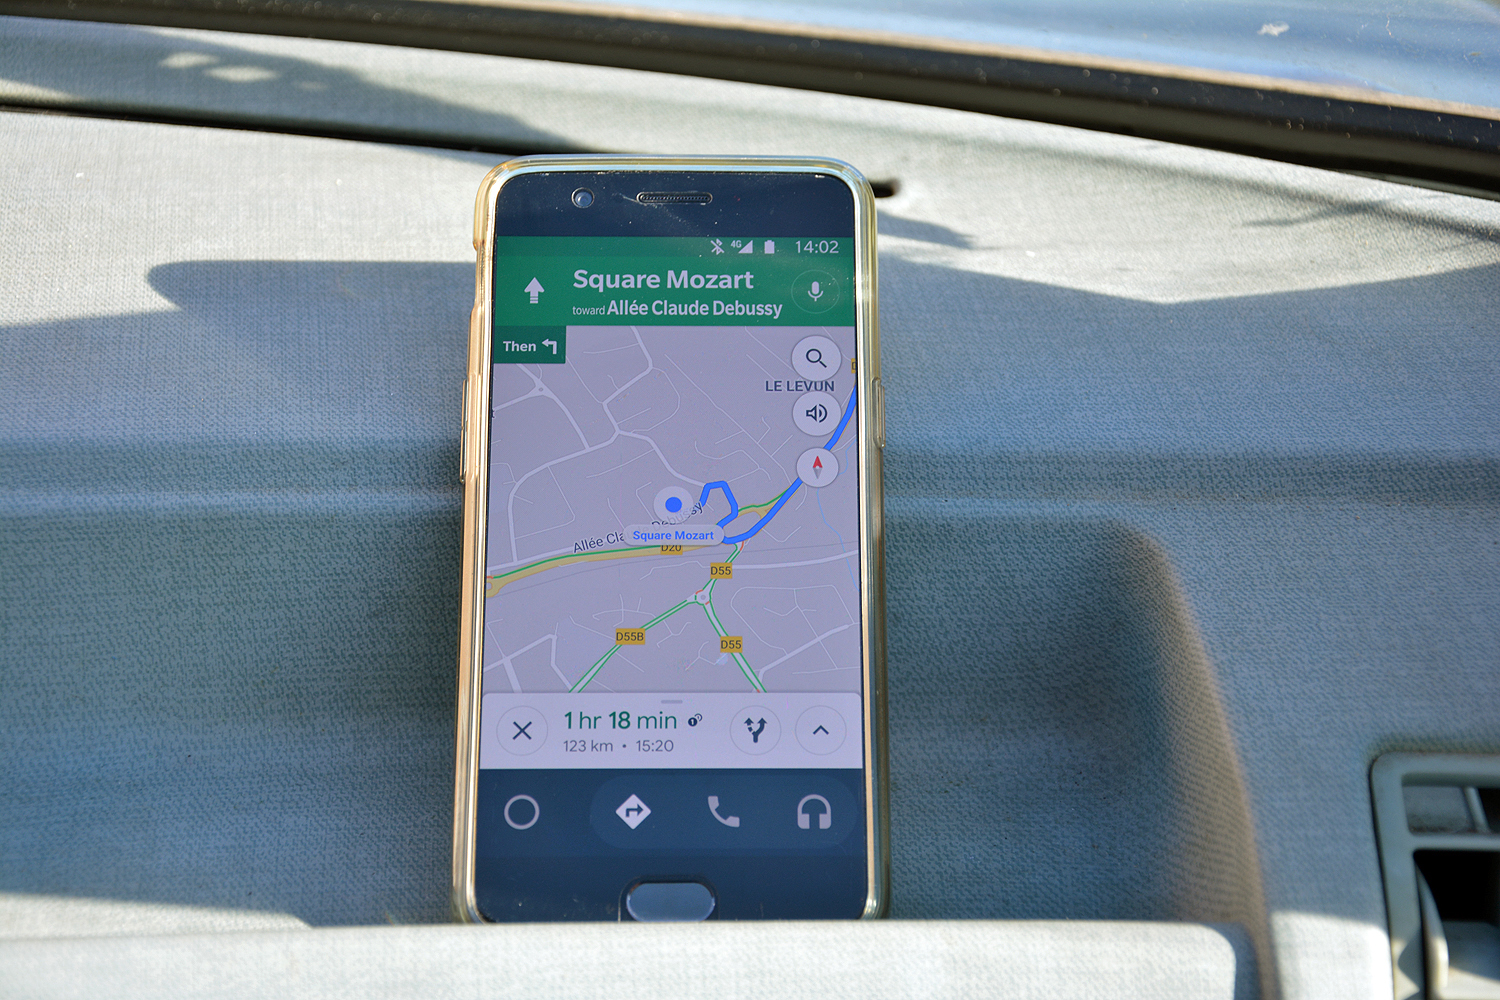 android auto november 2018 update focuses on messaging media rg 11 18 2